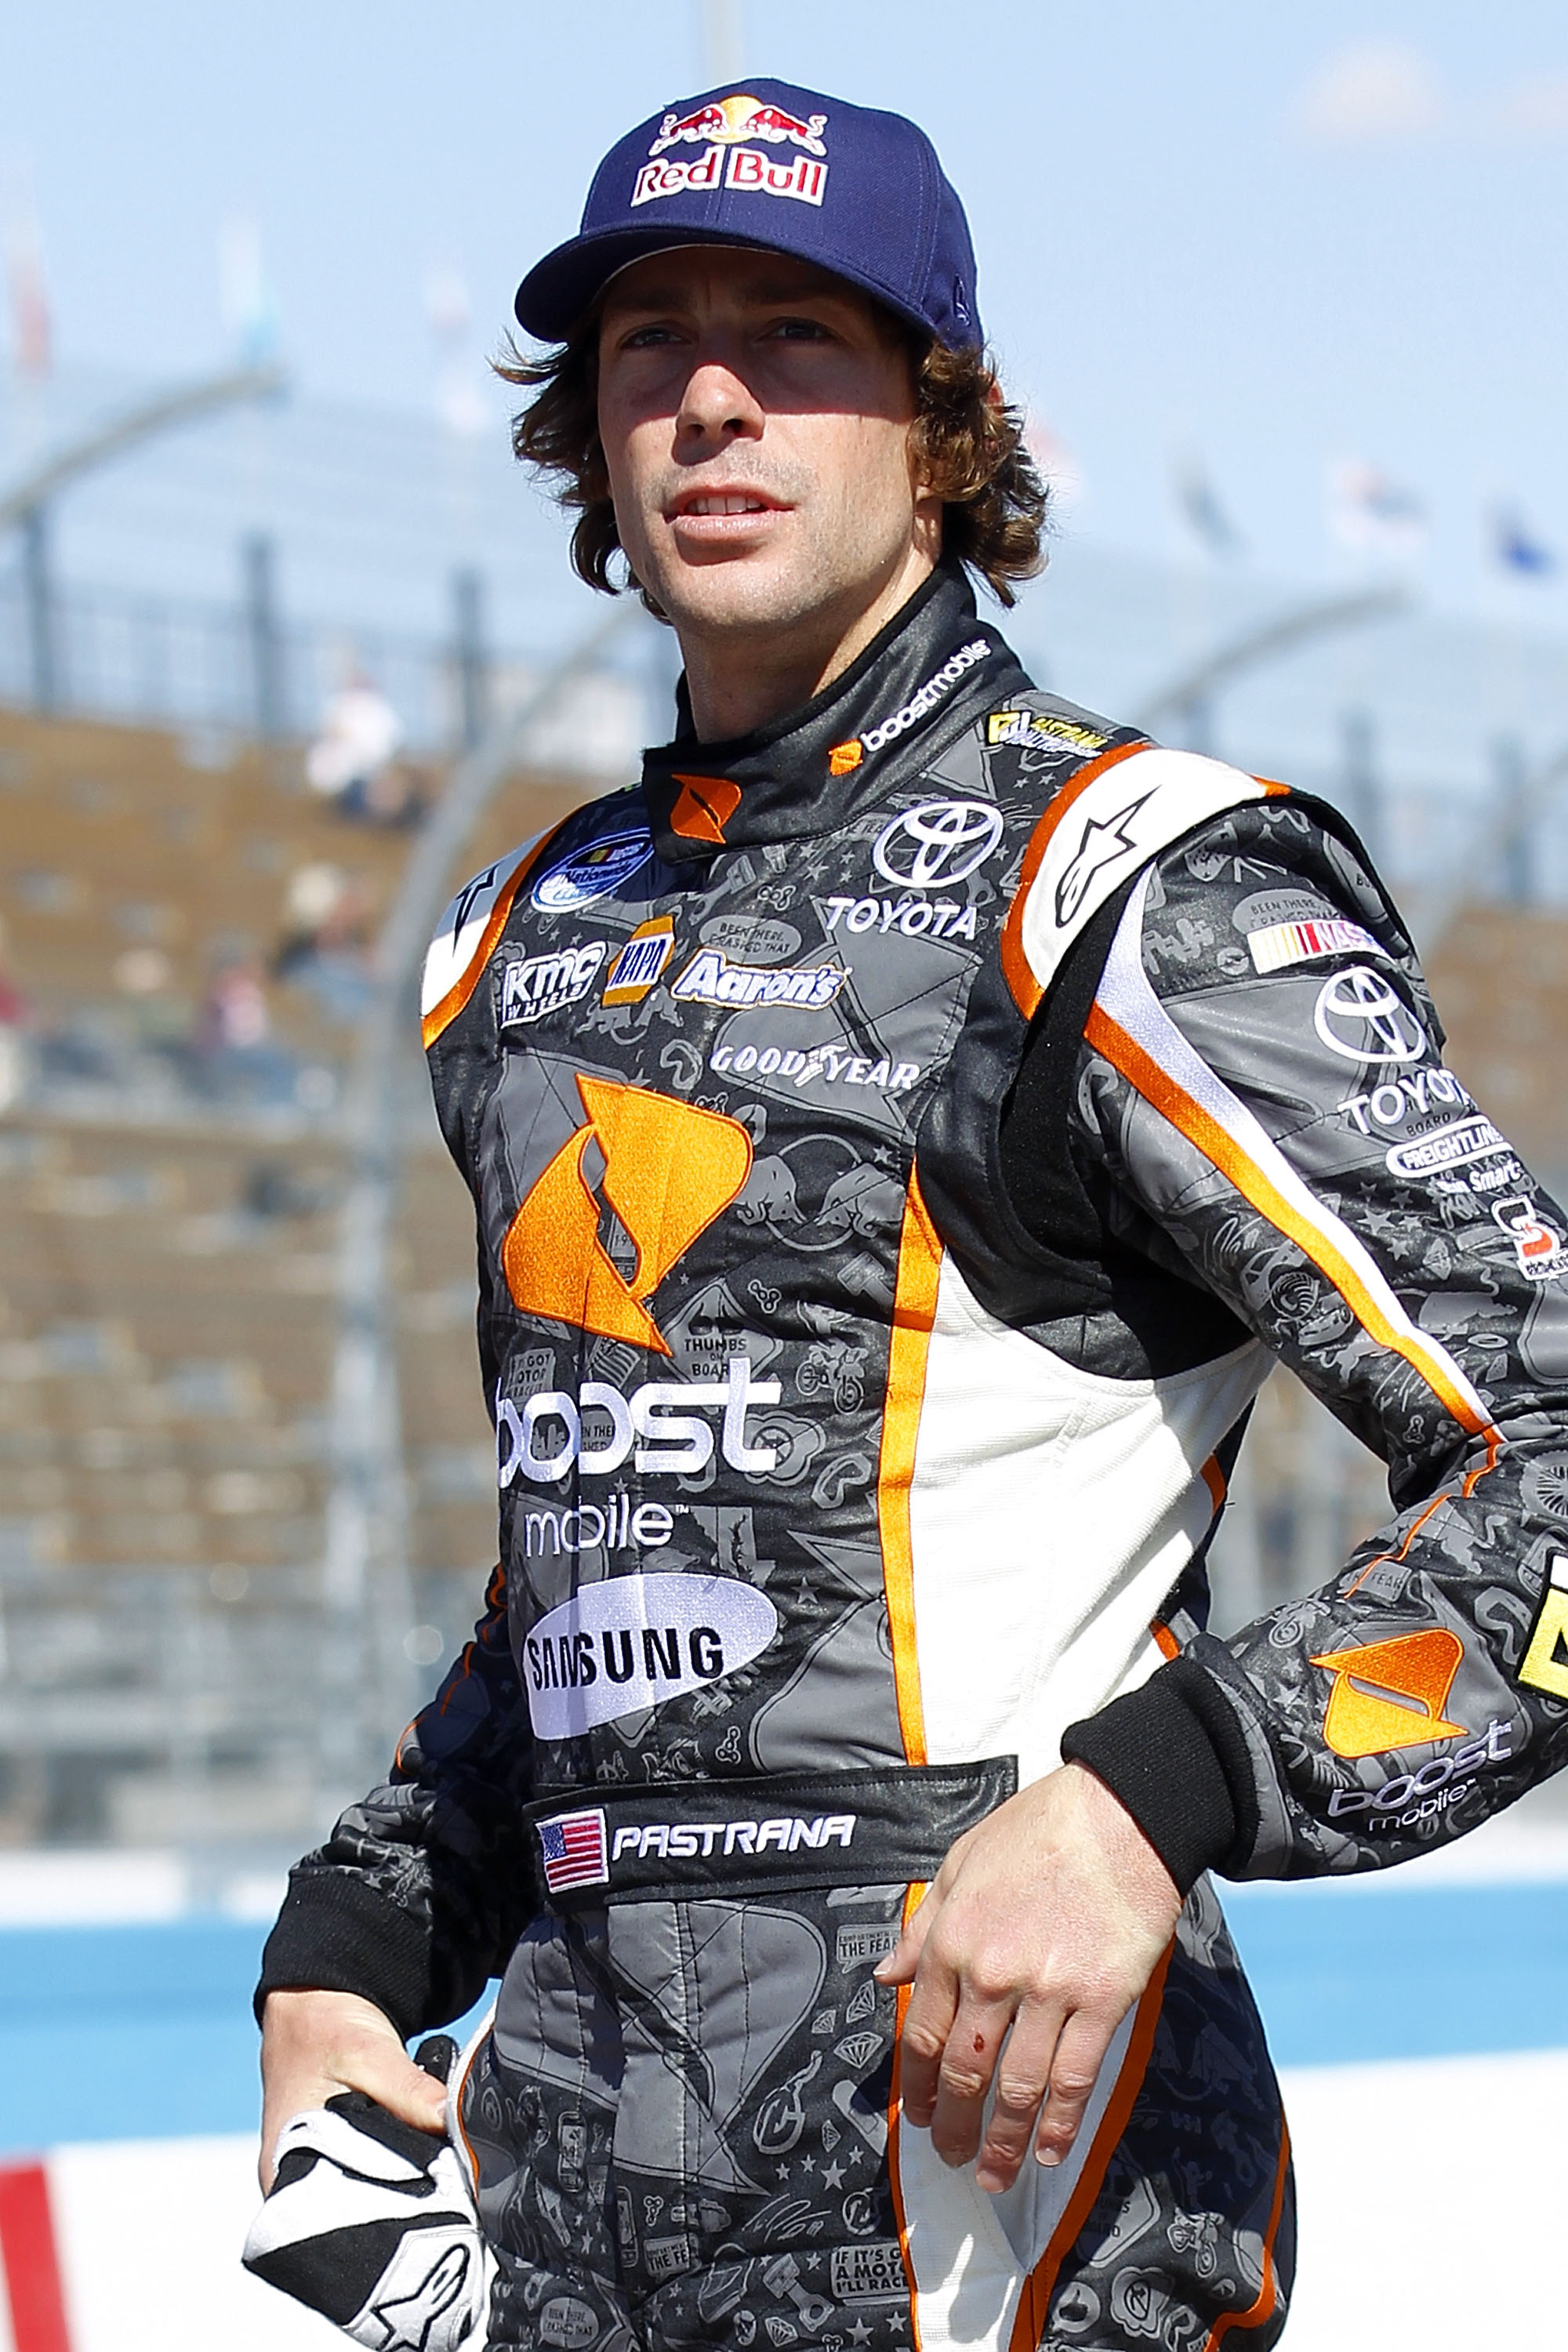 AVONDALE, AZ - FEBRUARY 24:  Travis Pastrana, driver of the #99 Boost Mobile Toyota, waits on pit road during qualifying for the NASCAR K&N Pro Series West 3 Amigos Organic Blanco 100 at Phoenix International Raceway on February 24, 2011 in Avondale, Ariz